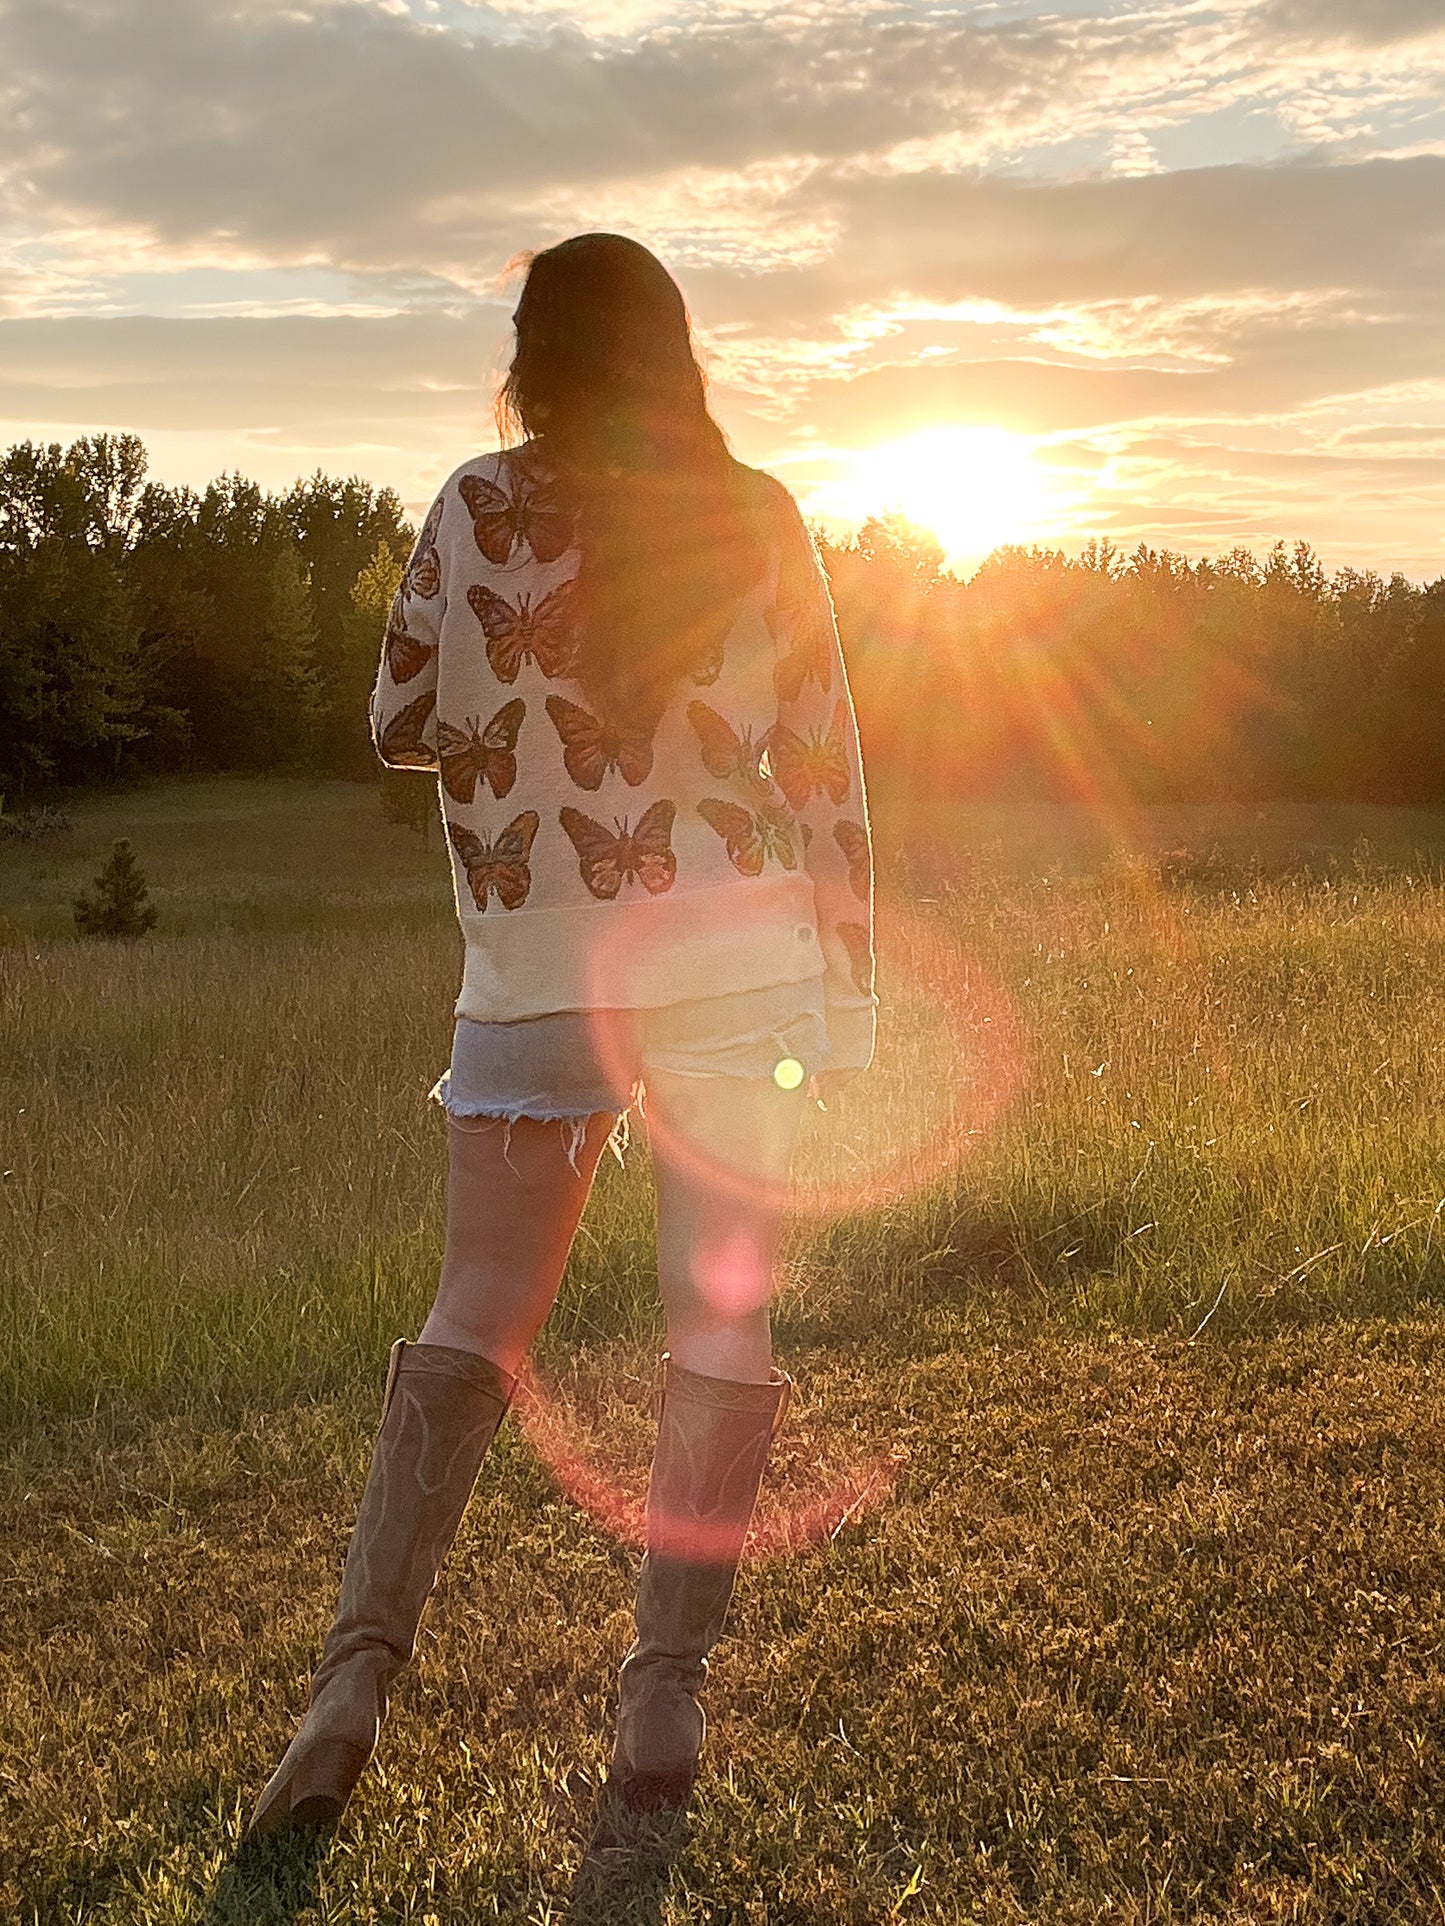 Pictures from the back, Merino Wool Cardigan in Milky White with butterflies in shades of red, blue, tangerine, and black.  Made in family owned factory in Italy. Worn with denim cutoff shorts and cowboy boots.